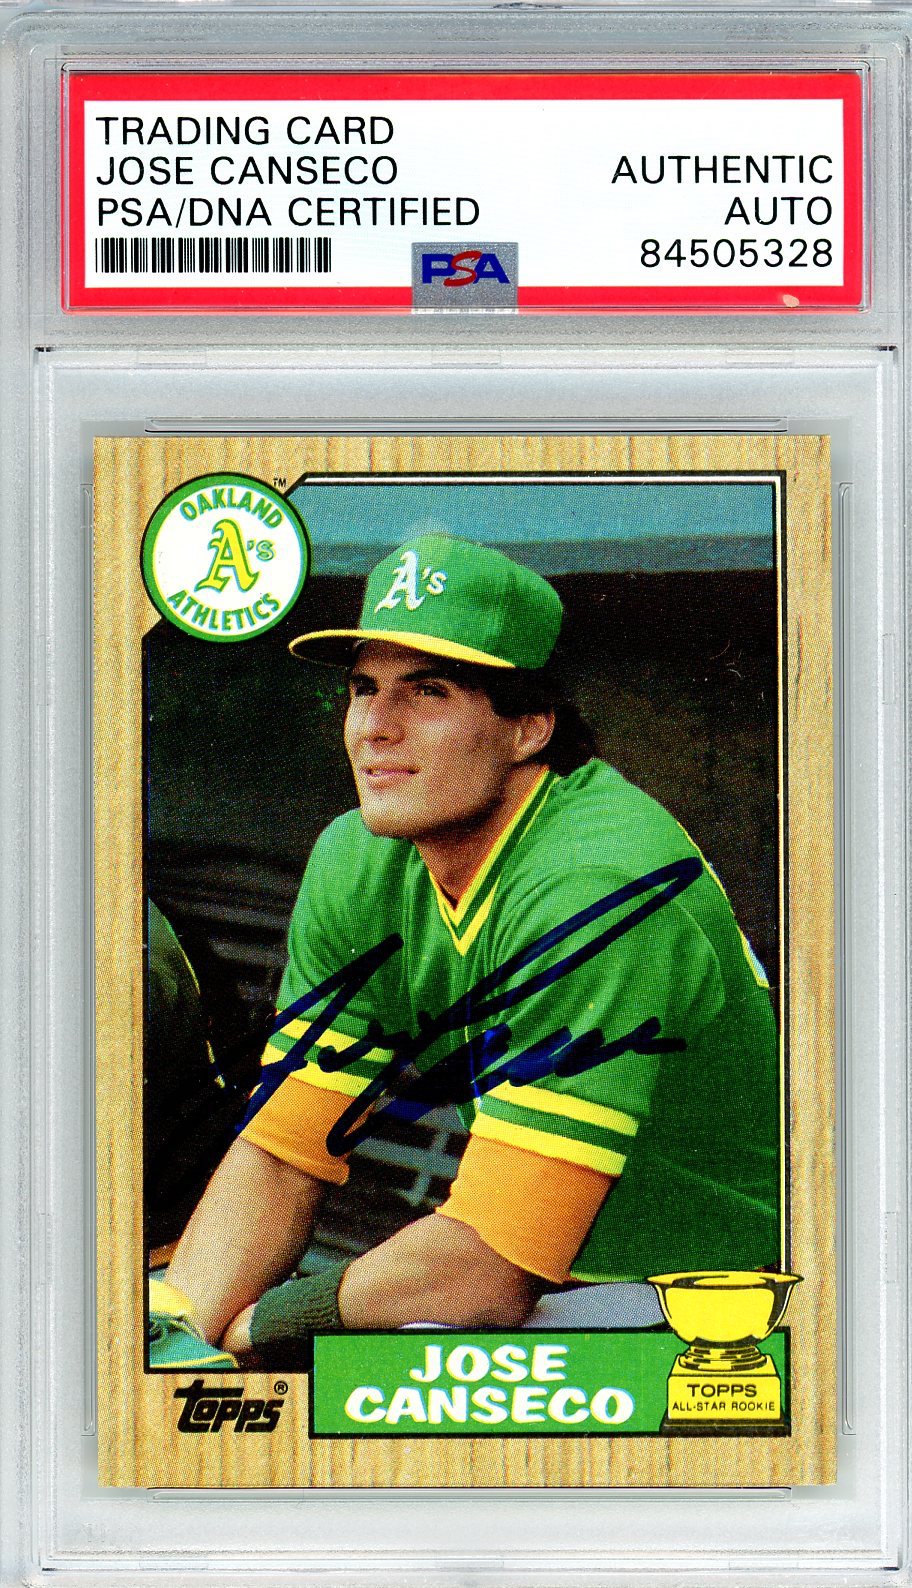 1987 TOPPS JOSE CANSECO AUTO RC ROOKIE #620 PSA DNA (328)